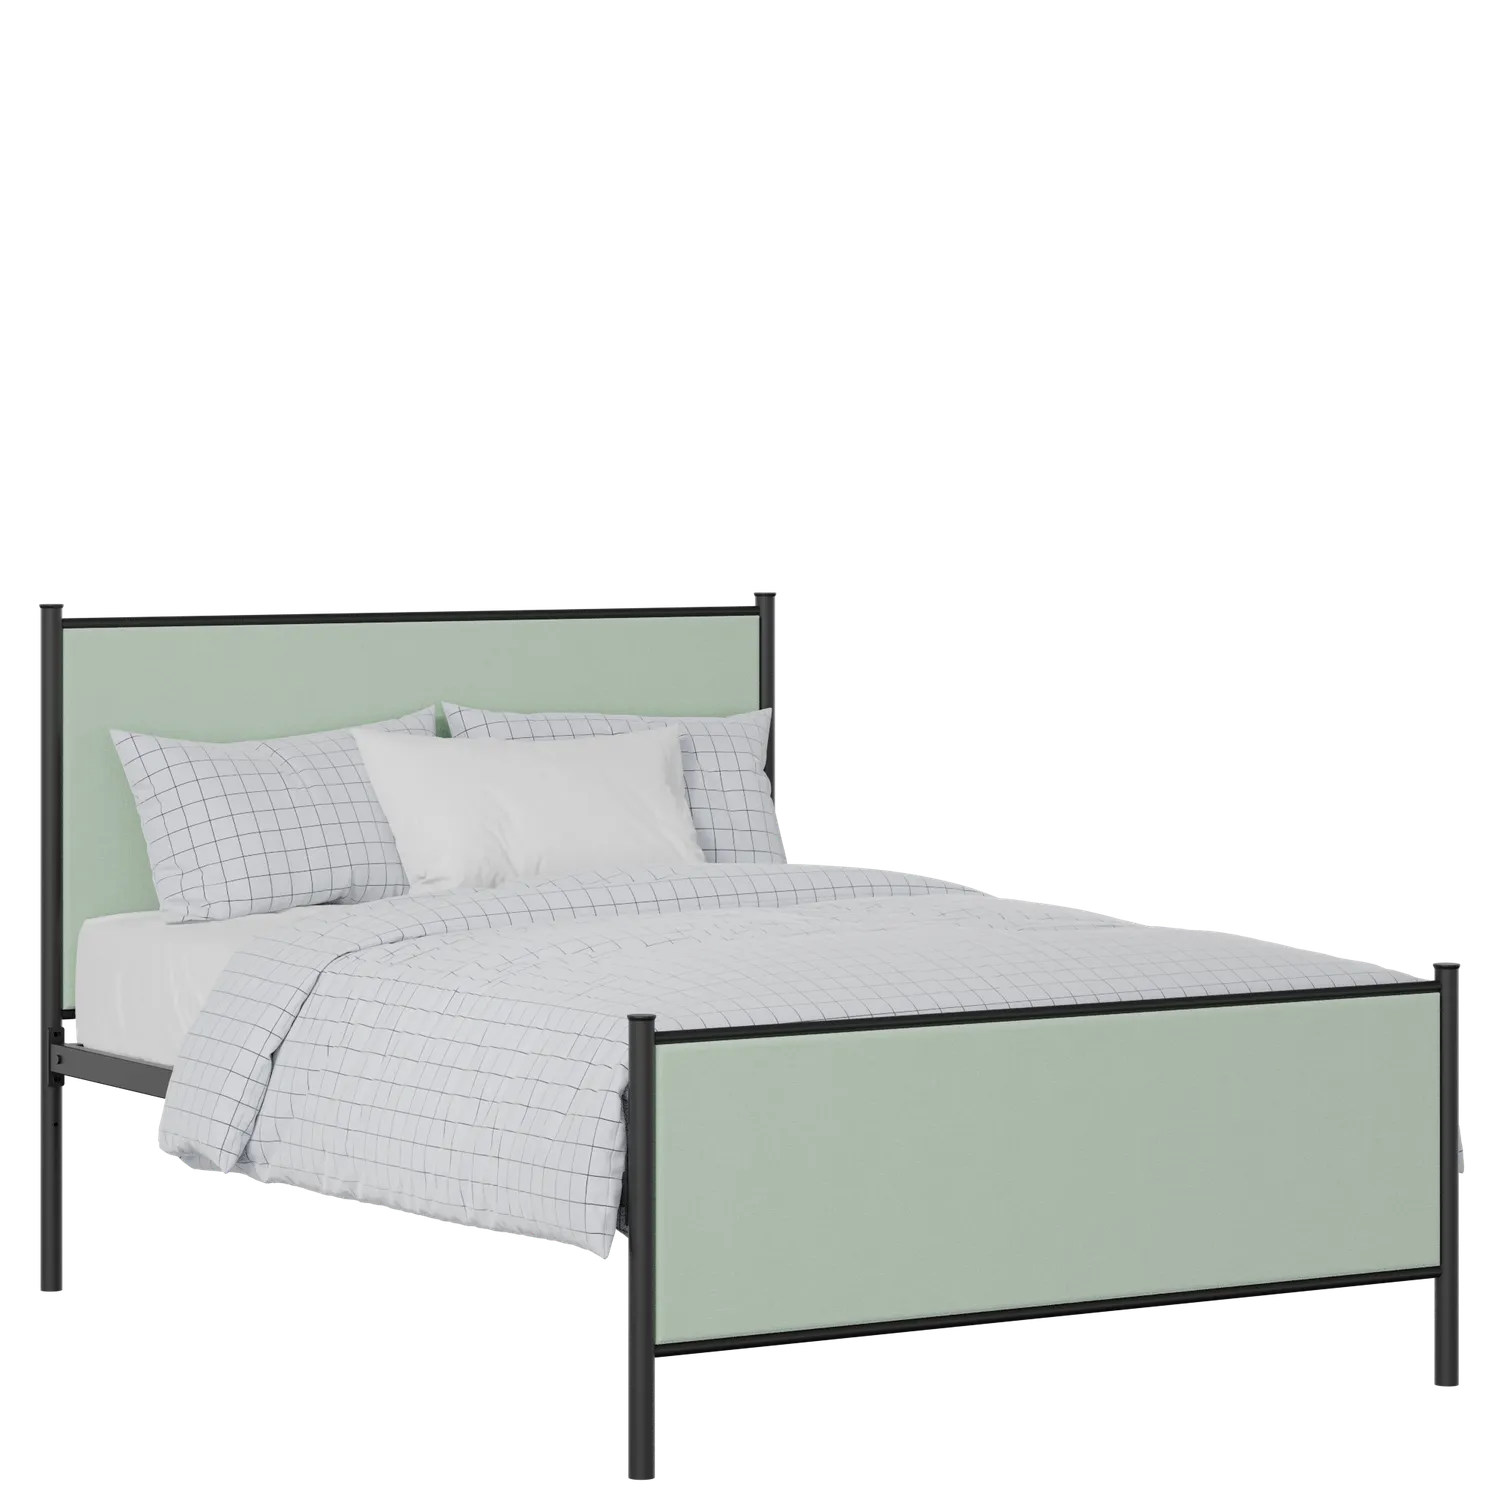 Brest iron/metal upholstered bed in black with mineral fabric